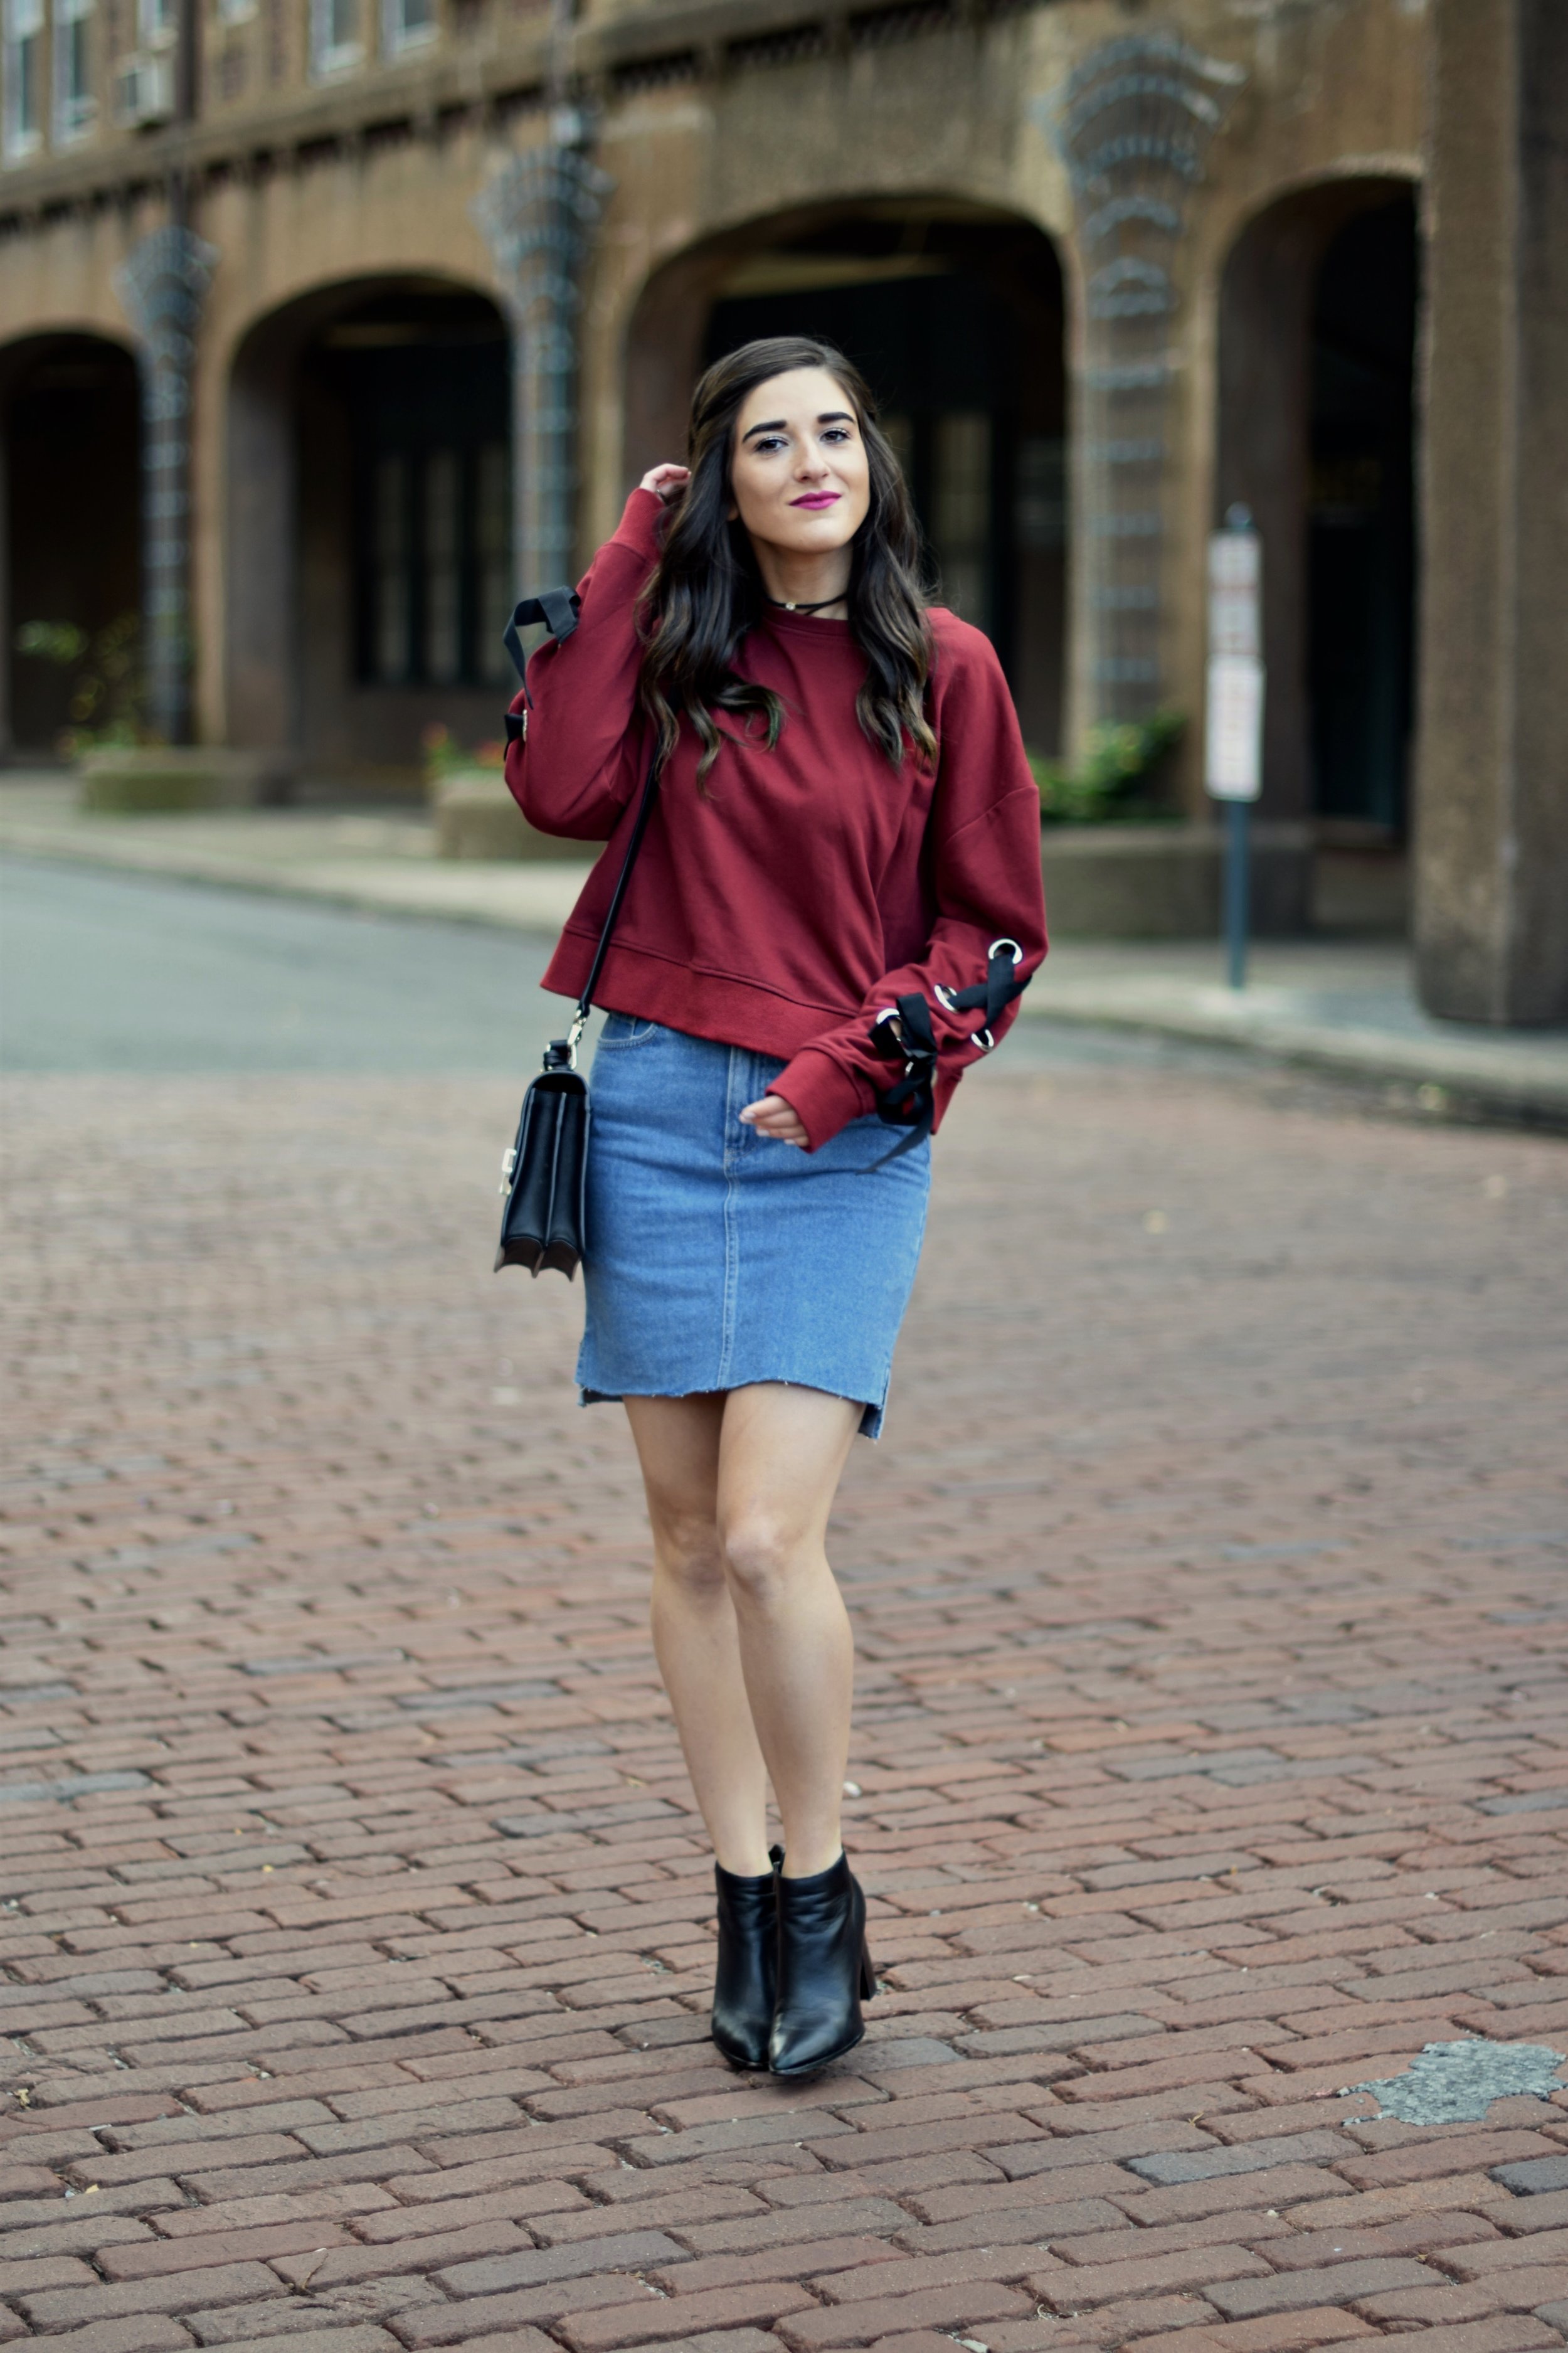 Red Lace-Up Sleeve Sweatshirt Denim Skirt 10 Things I'm Thankful For This Year Esther Santer Fashion Blog NYC Street Style Blogger Outfit OOTD Trendy Girl Women Choker Black Booties Hair Brunette Henri Bendel West 57th Schoolbag Winter Look Fall OOTD.jpg